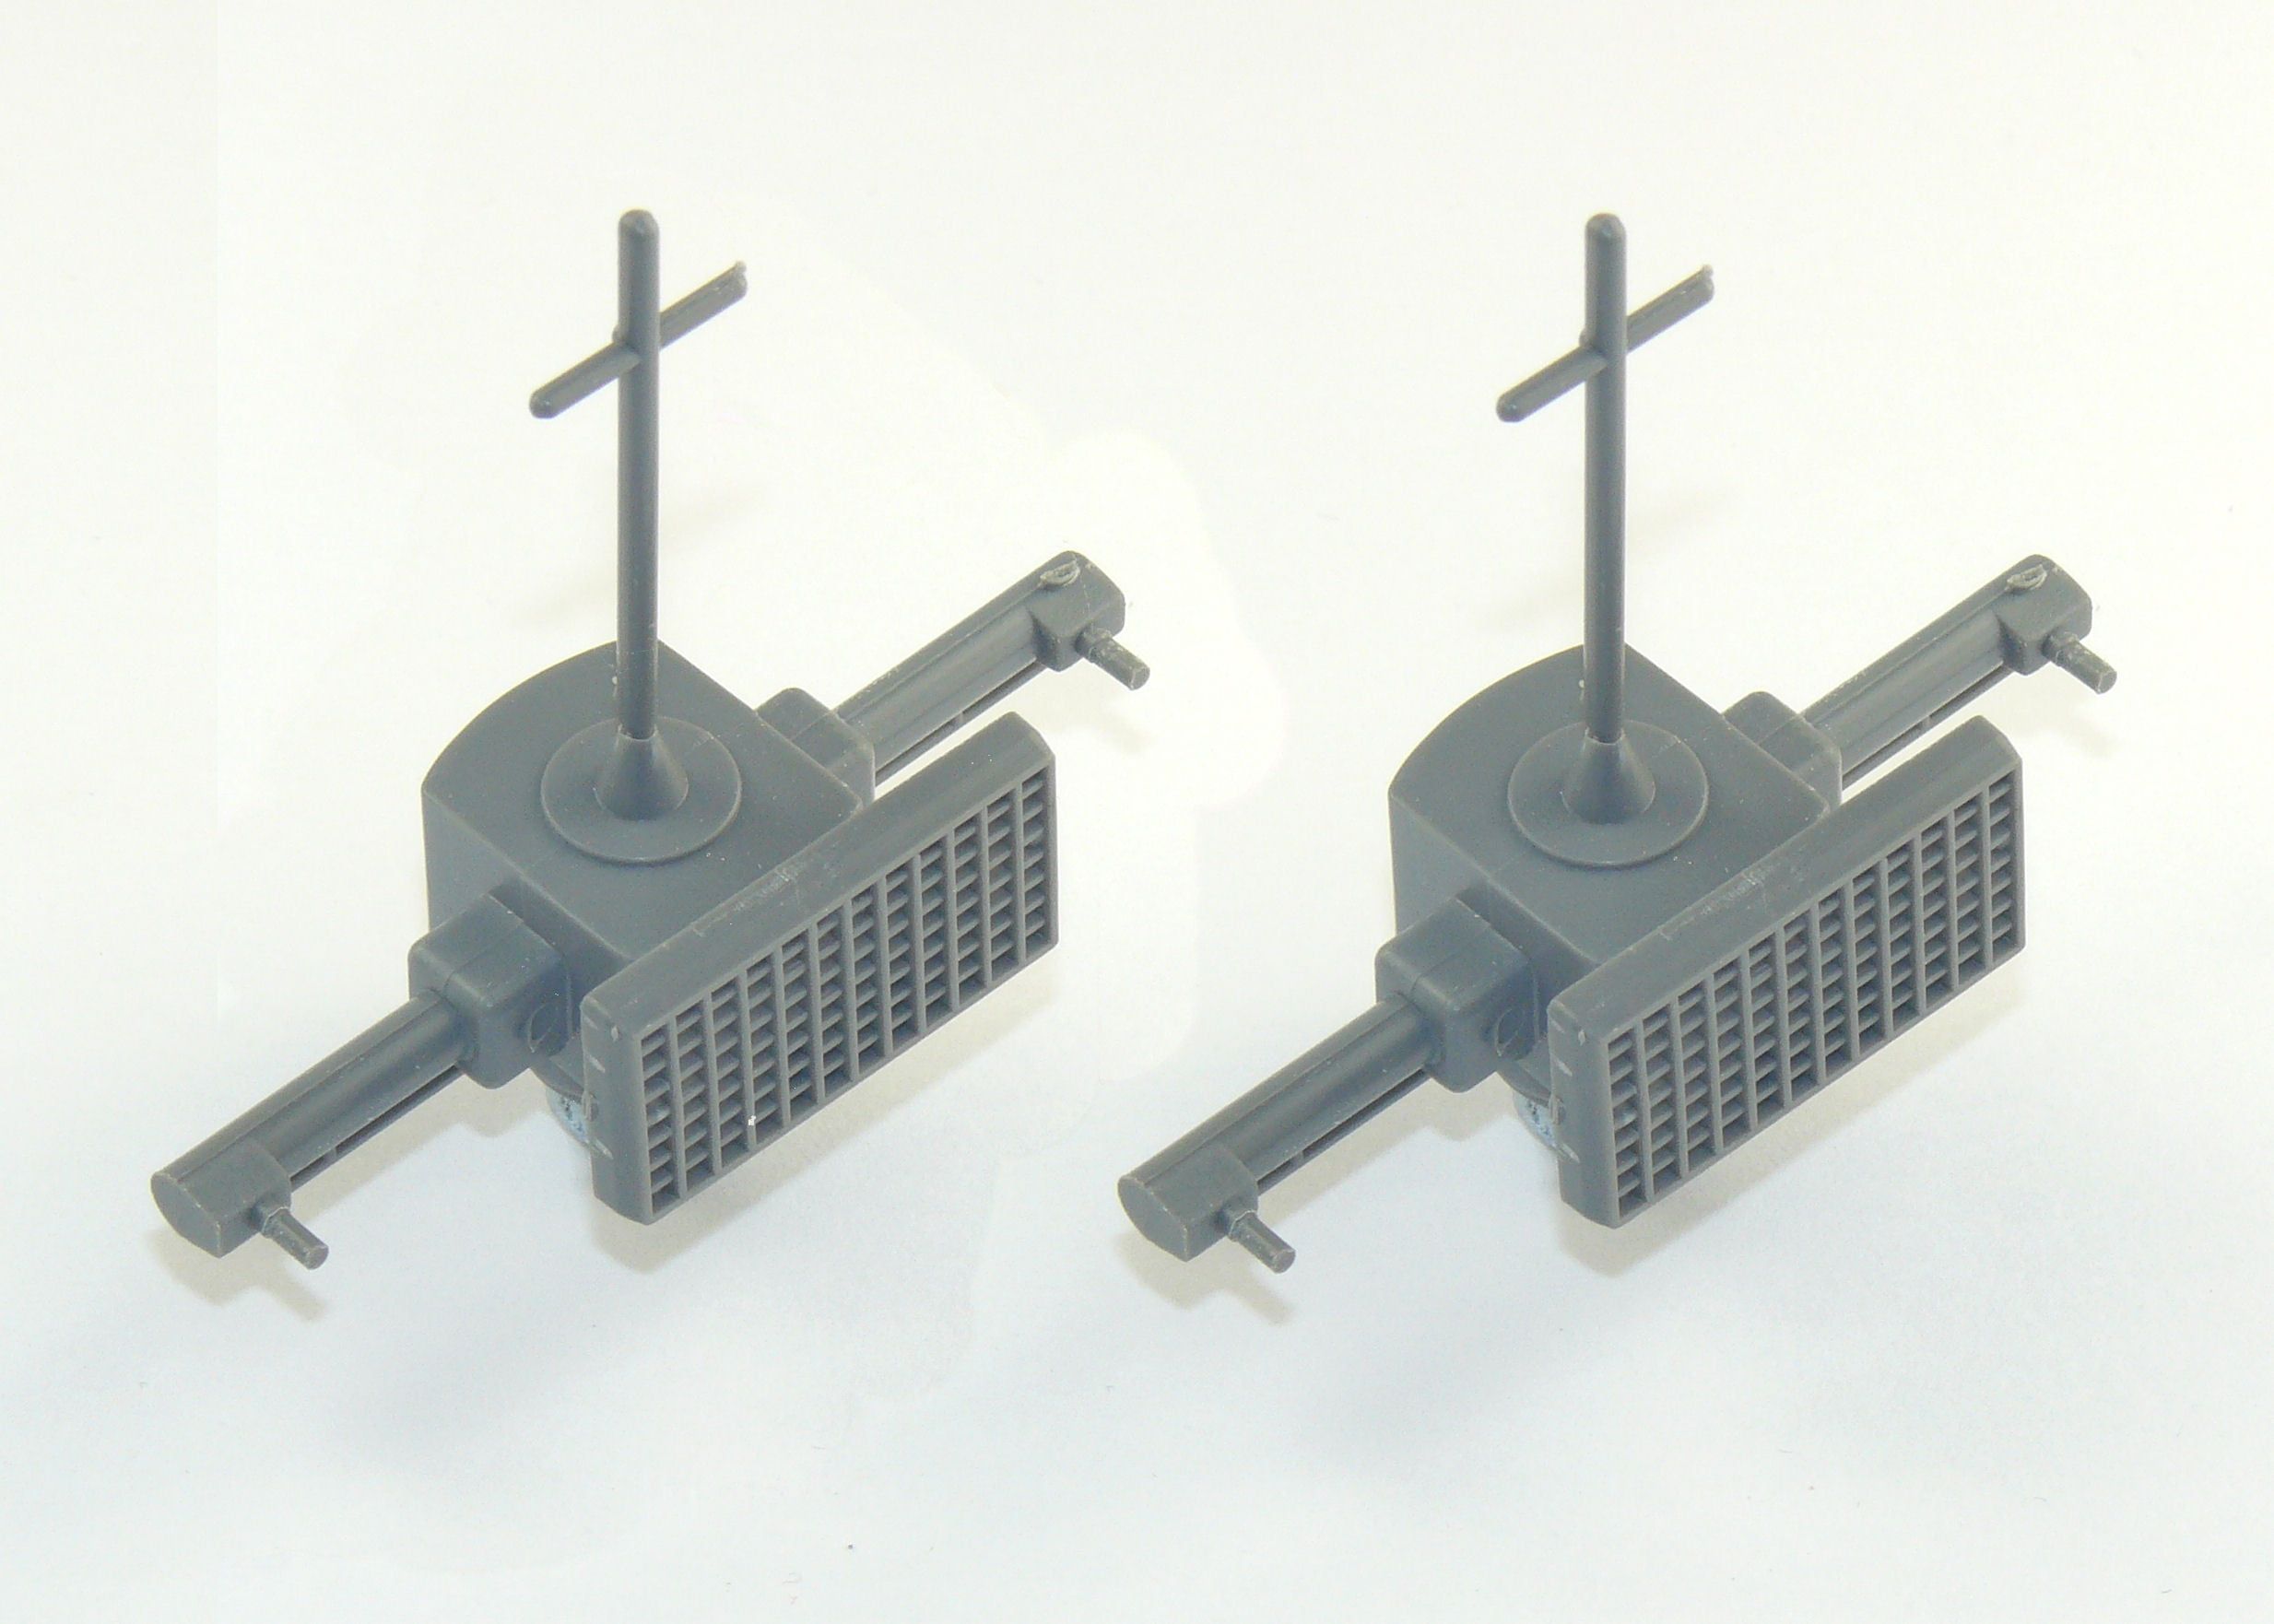 Radar and Range Finder 55 x 54mm 1:200 Scale Pack of 2 for Model Ship Kits